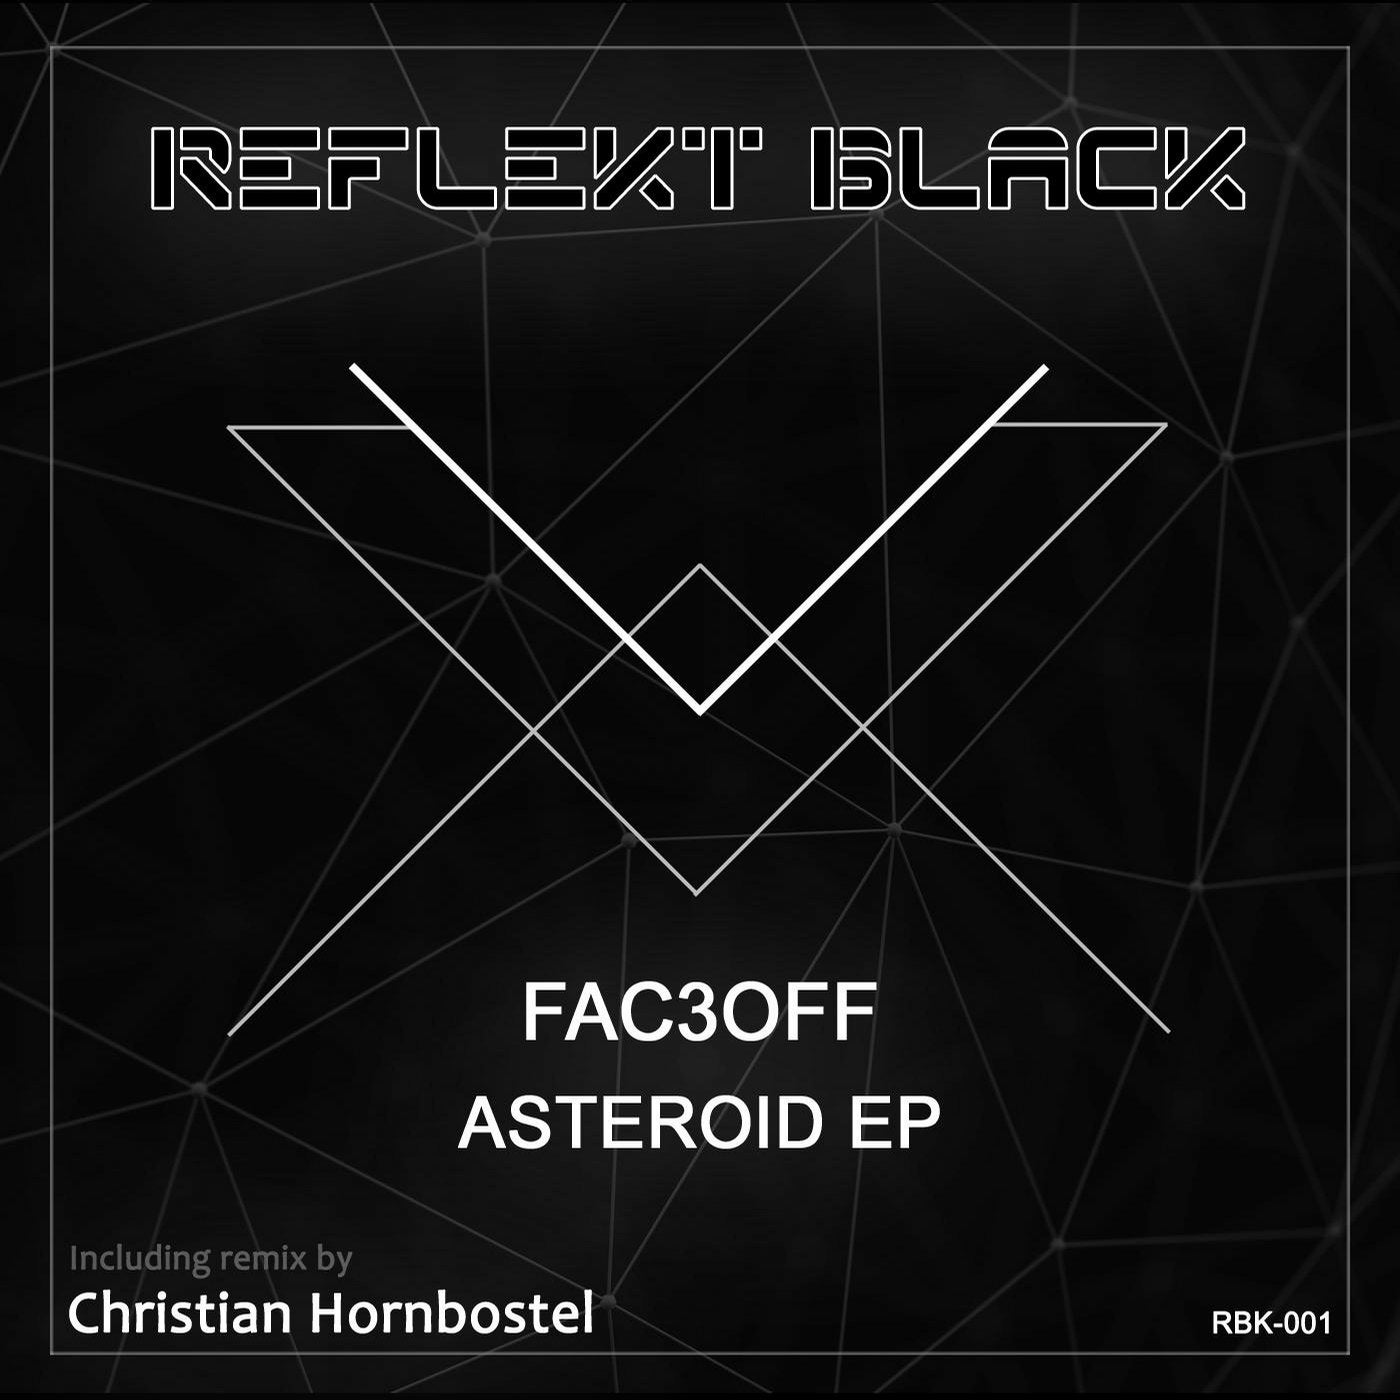 Asteroid EP